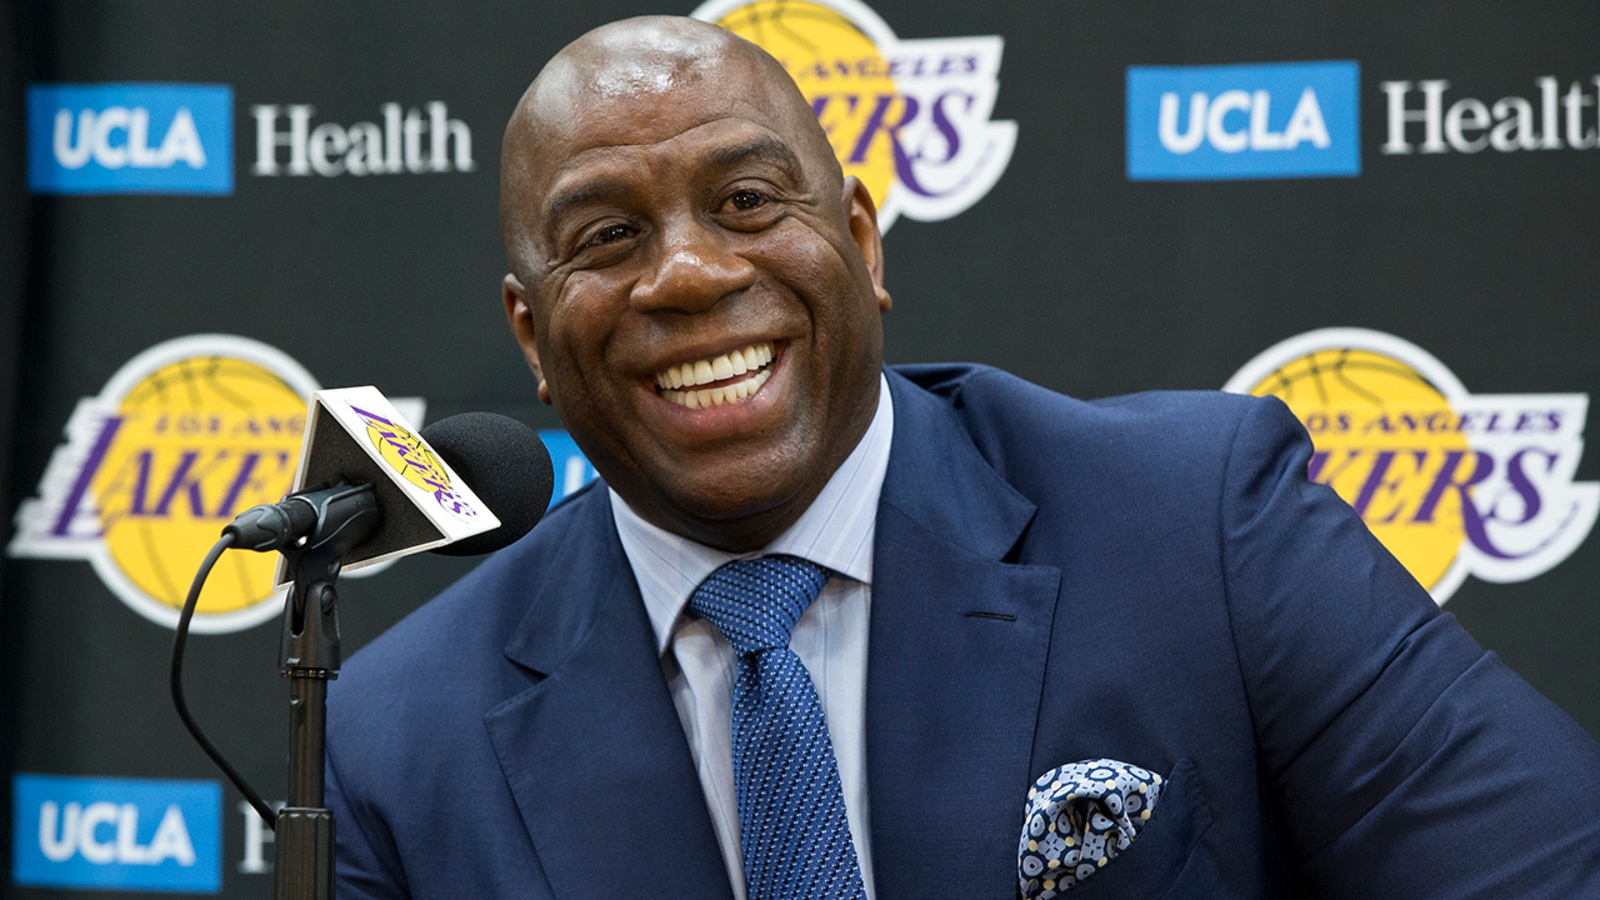 Details on Magic Johnson's share in the Washington Commanders sale.